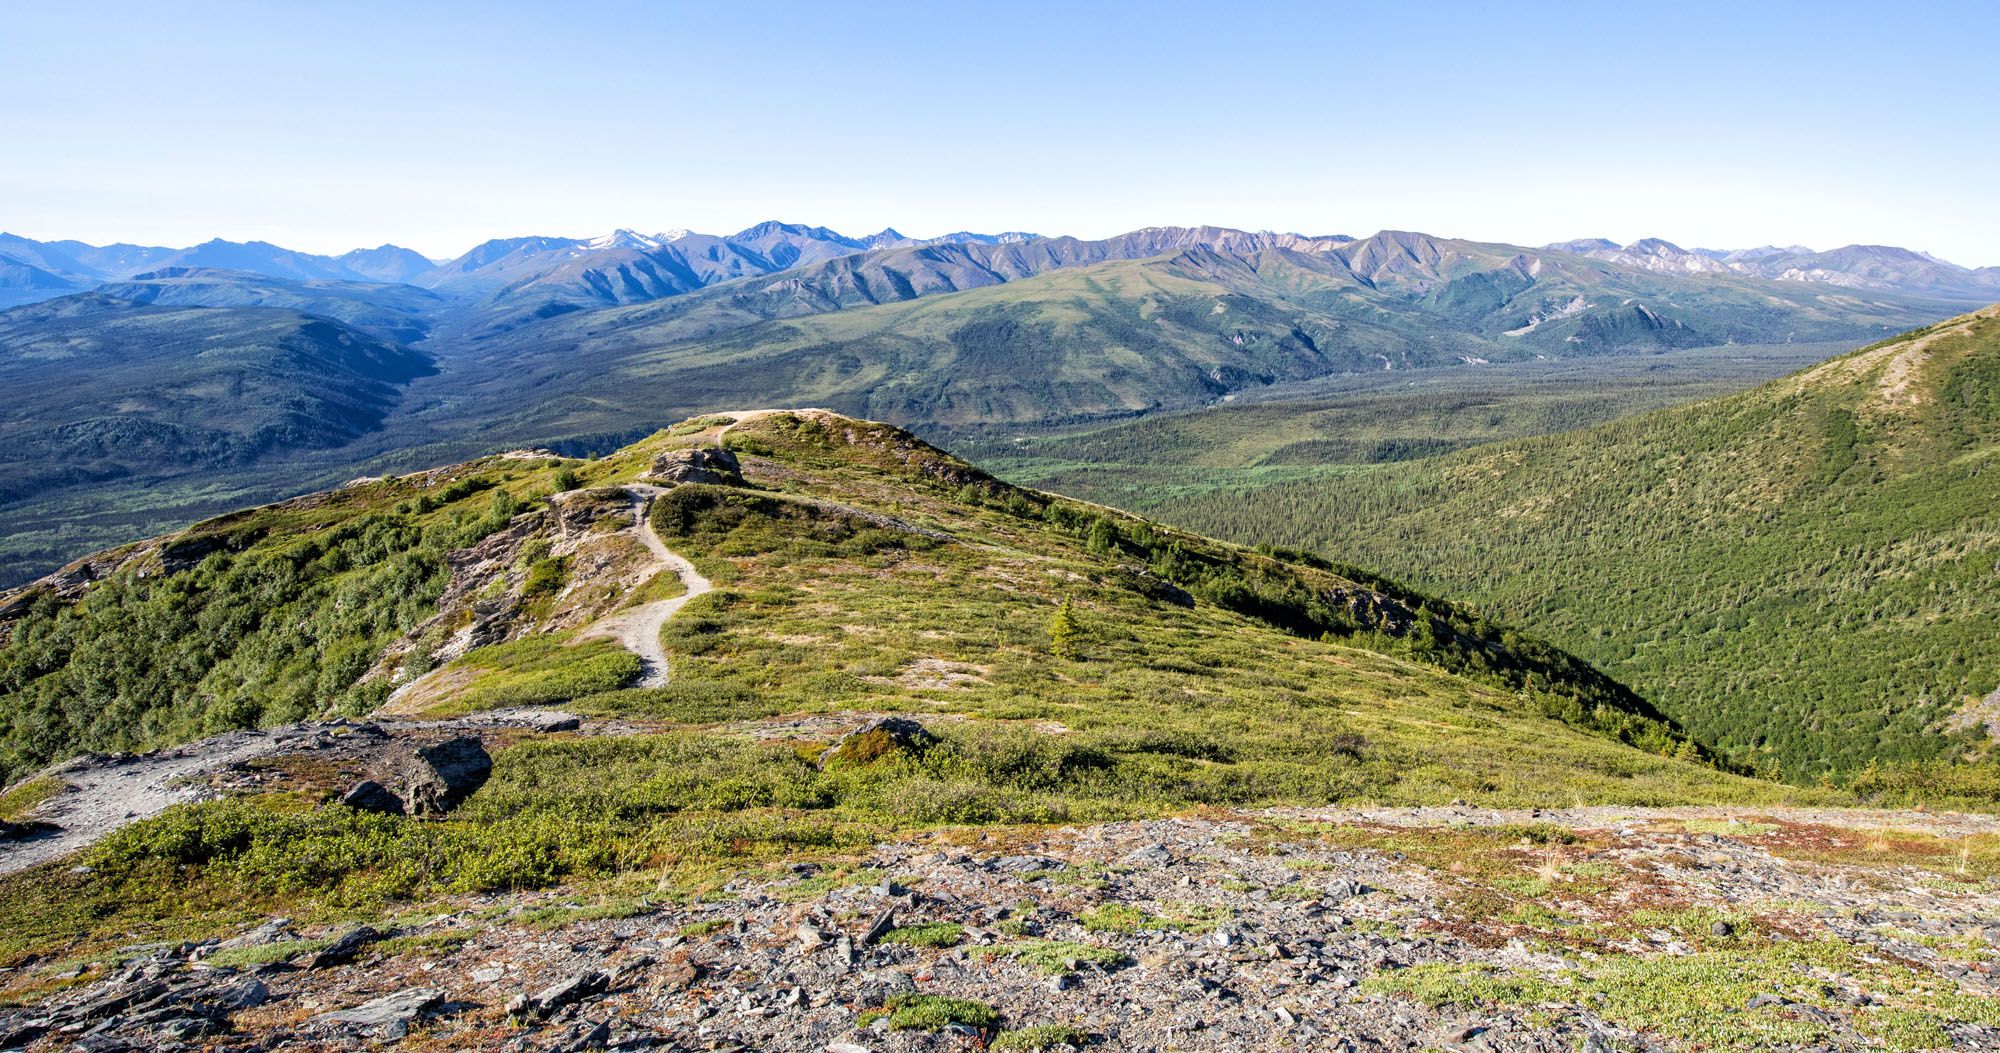 Featured image for “Mount Healy Overlook Trail | Step-By-Step Guide, Stats, Photos”